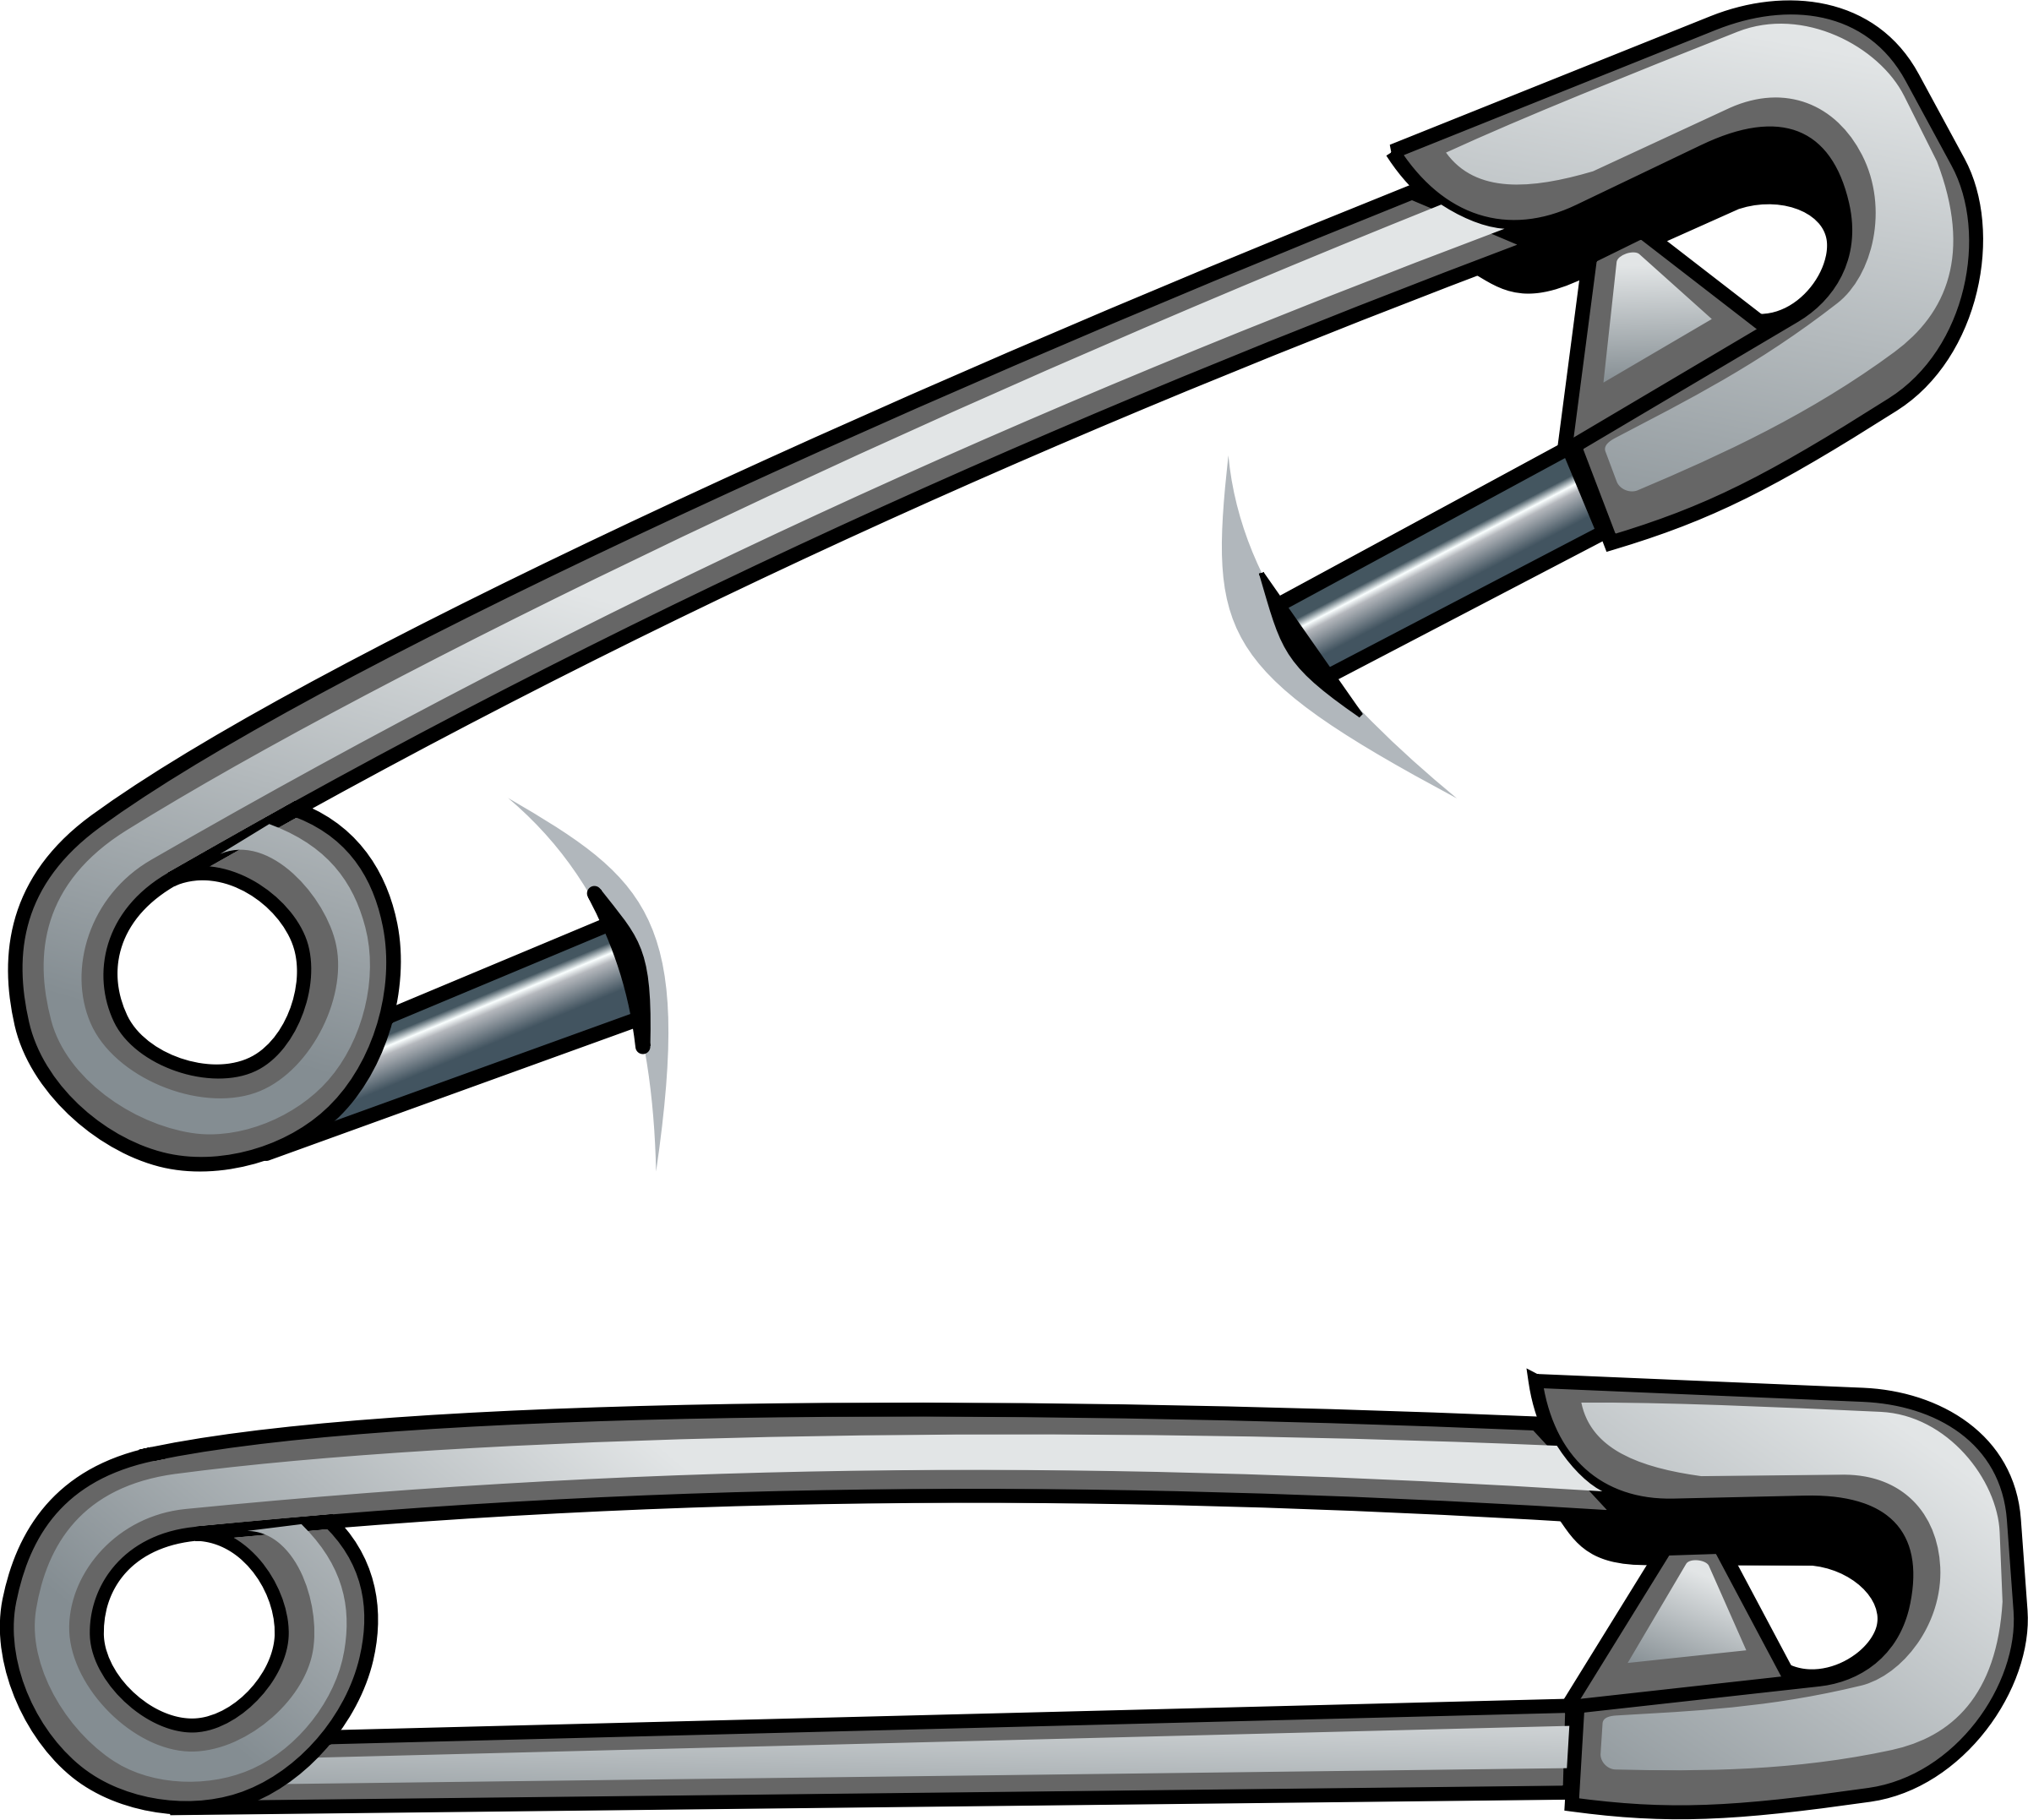 Safety-pin-closed Png - ClipArt Best